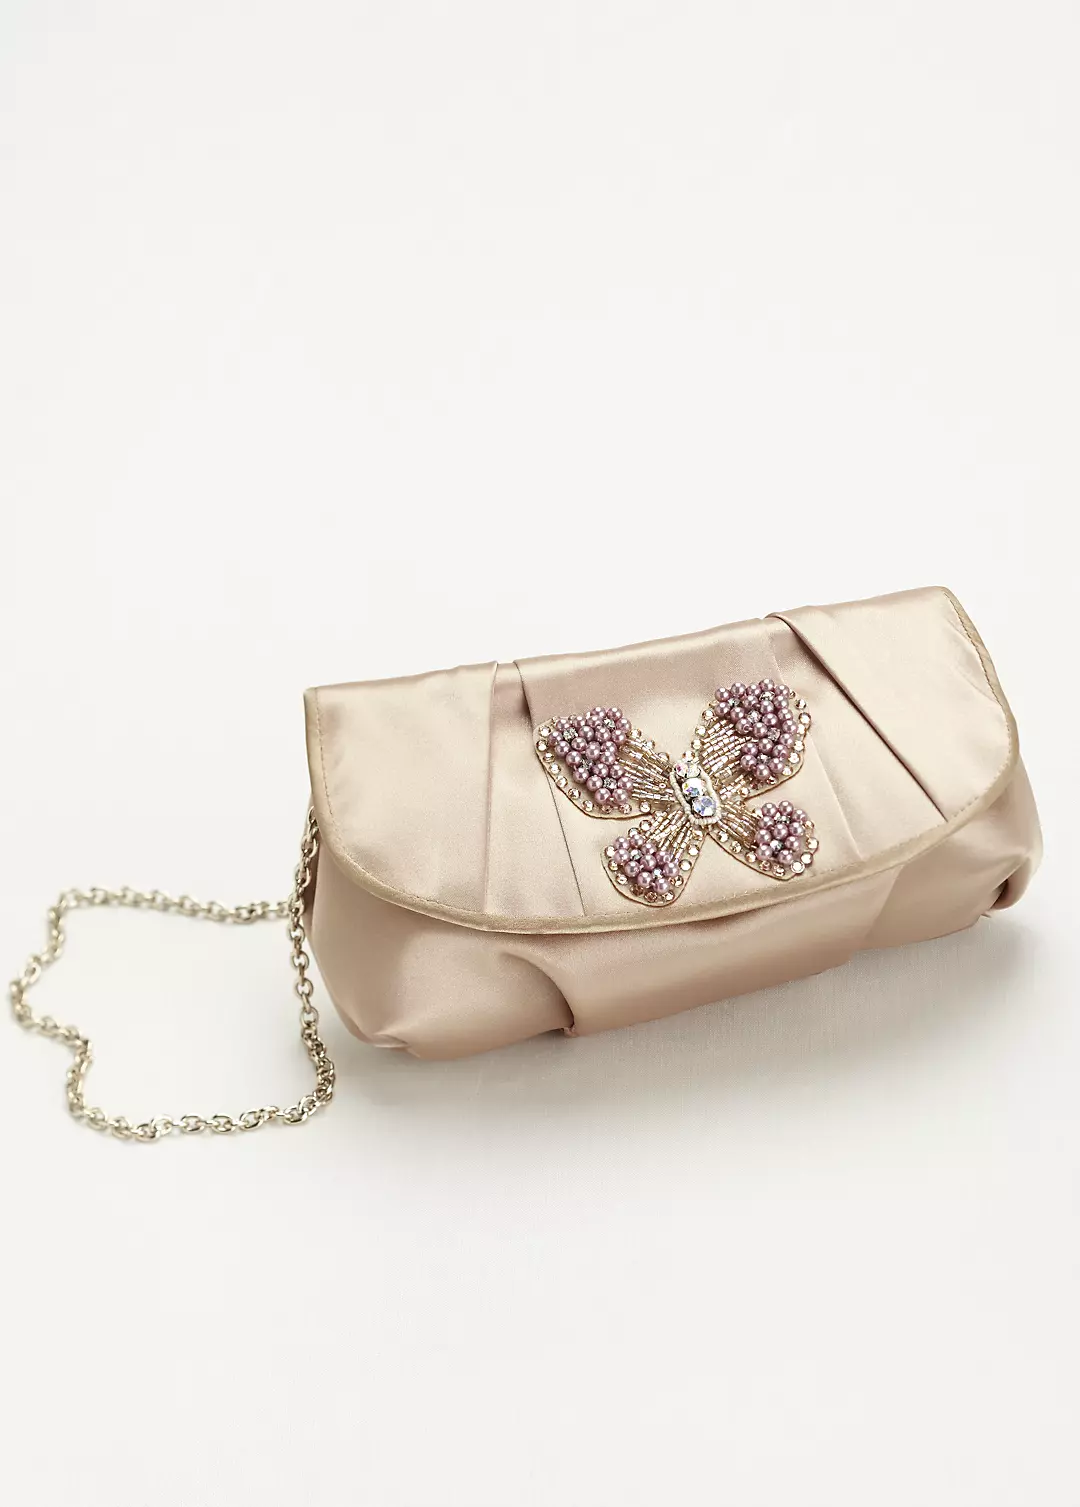 Satin Clutch with Butterfly Ornament by Menbur Image 3